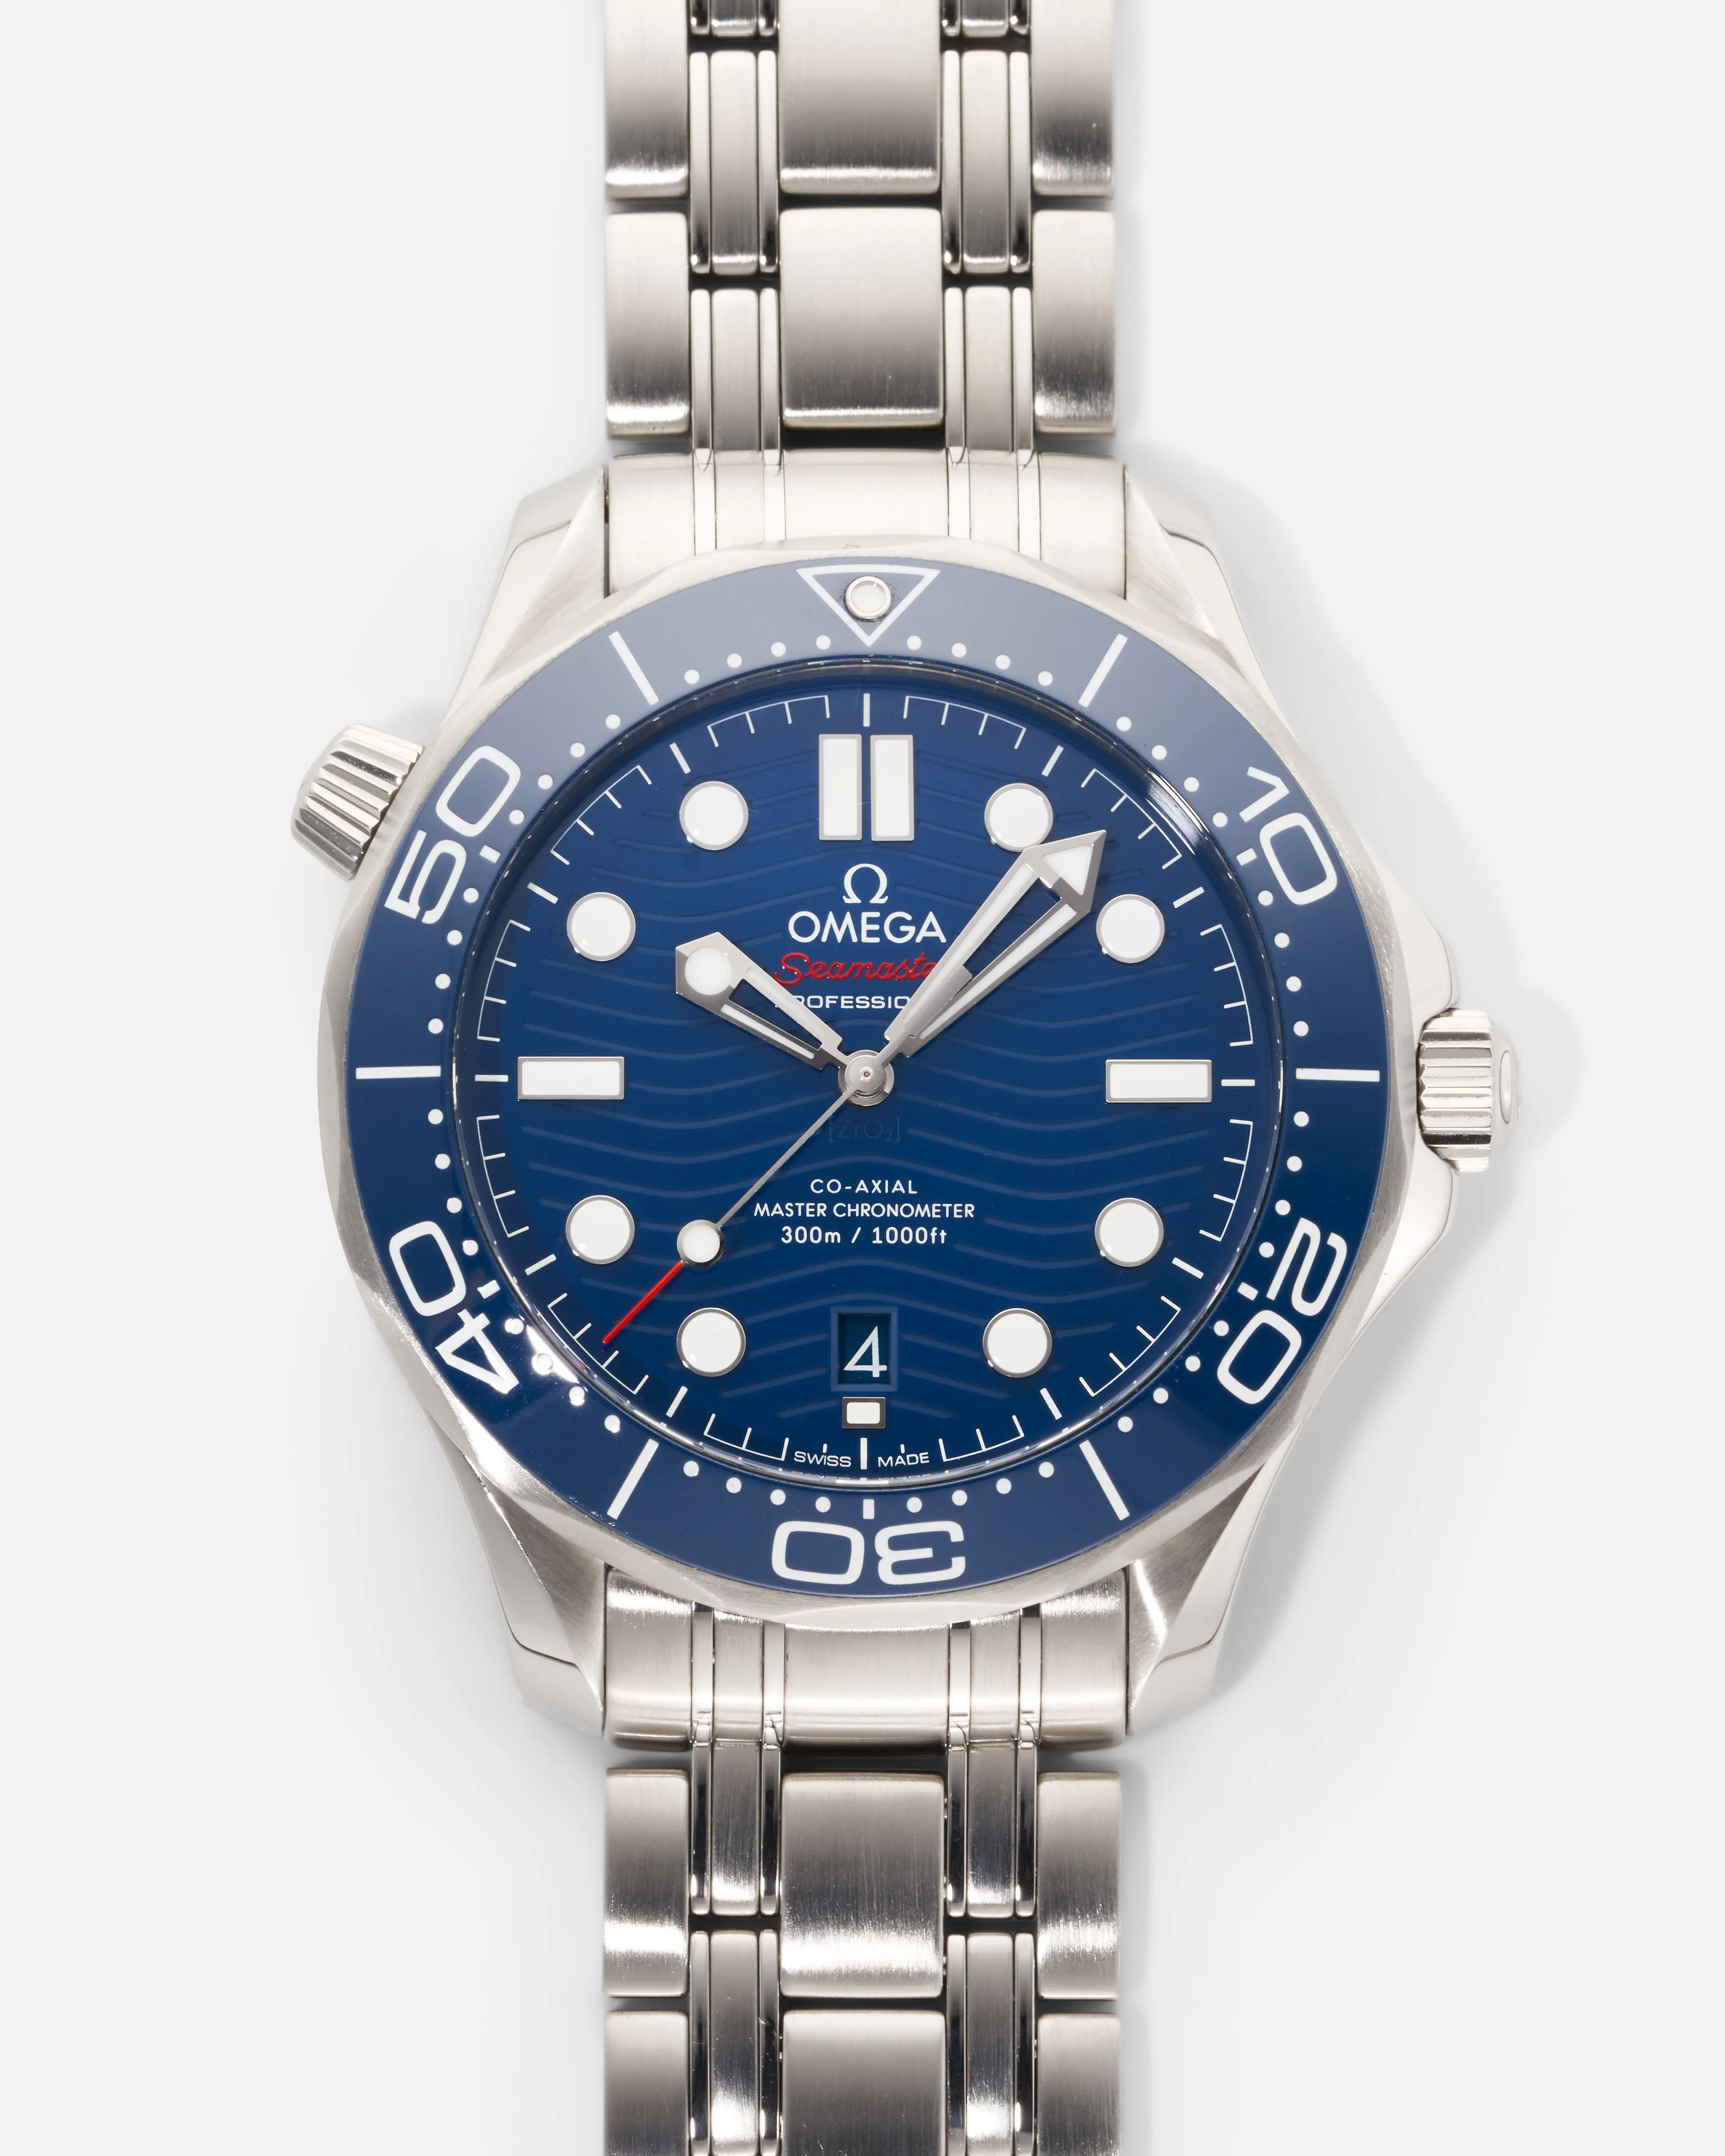 Omega Seamaster Diver 300M 210.30.42.20.03.001 42mm Stainless steel